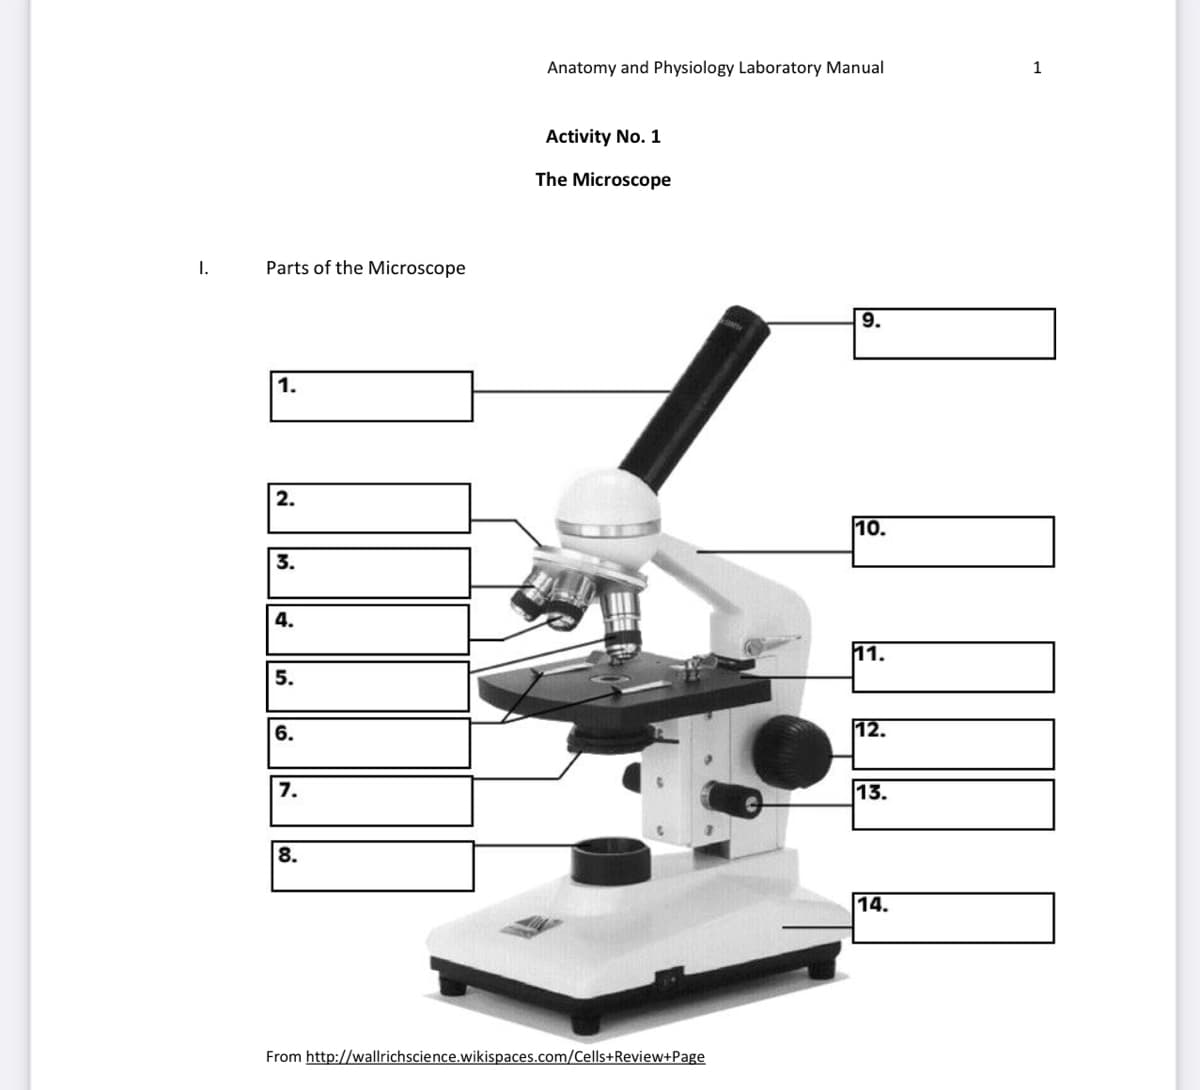 I.
Parts of the Microscope
1.
2.
1
3.
4.
5.
6.
7.
8.
Anatomy and Physiology Laboratory Manual
Activity No. 1
The Microscope
From http://wallrichscience.wikispaces.com/Cells+Review+Page
9.
10.
[[!!]
11.
12.
13.
1
14.